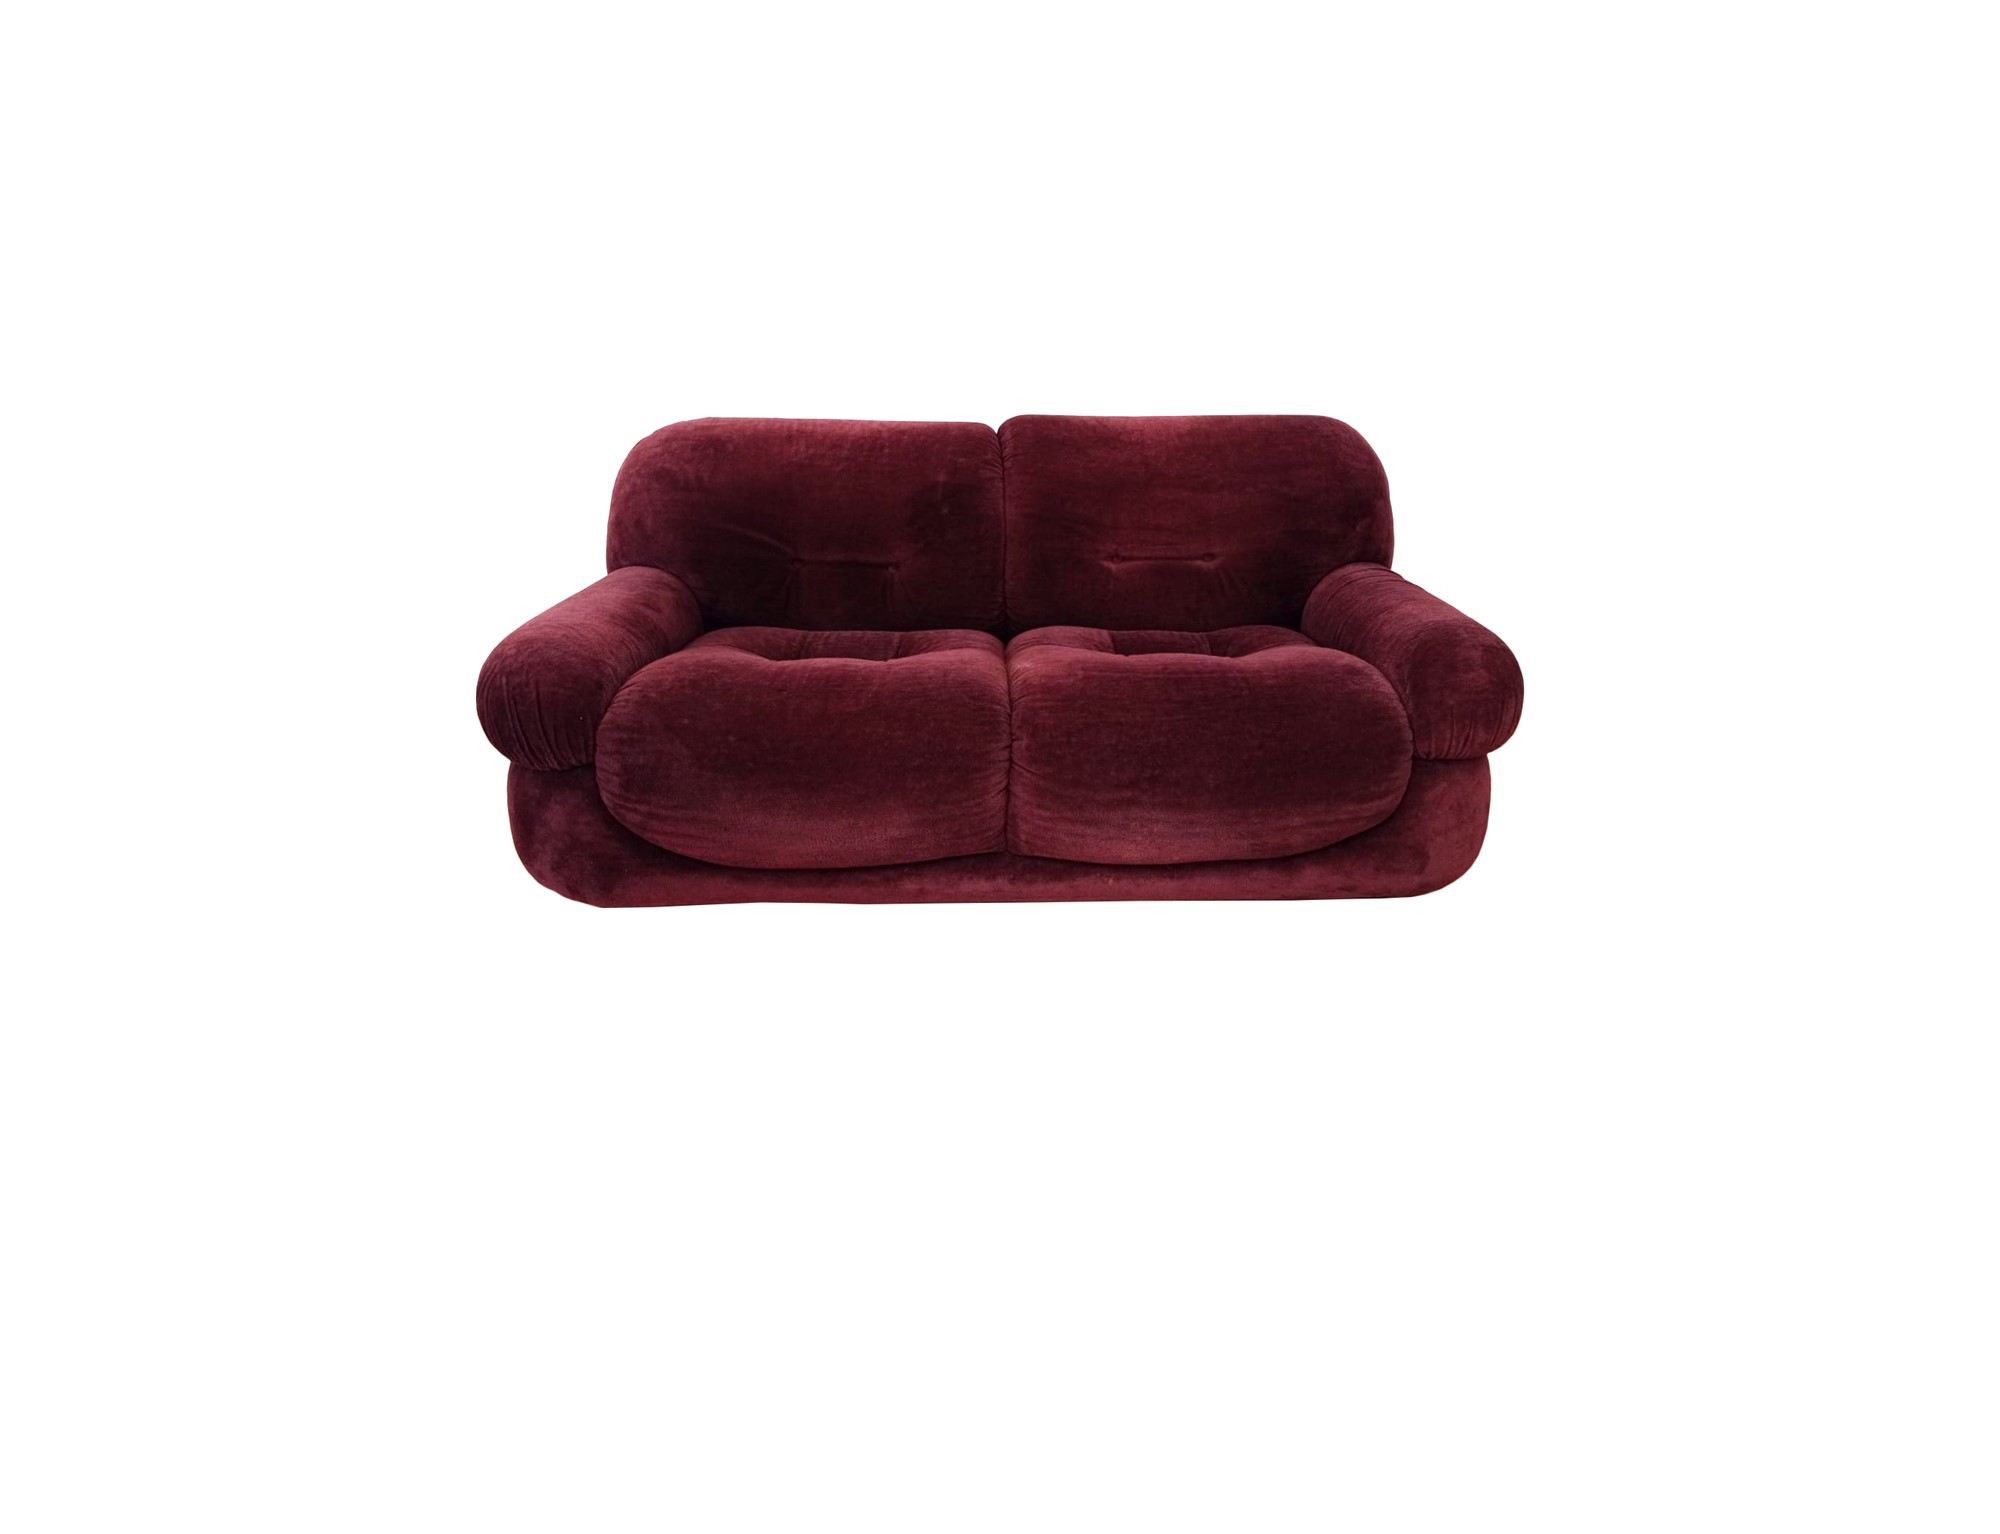 Two seater Sapporo sofa - Image 11 of 11